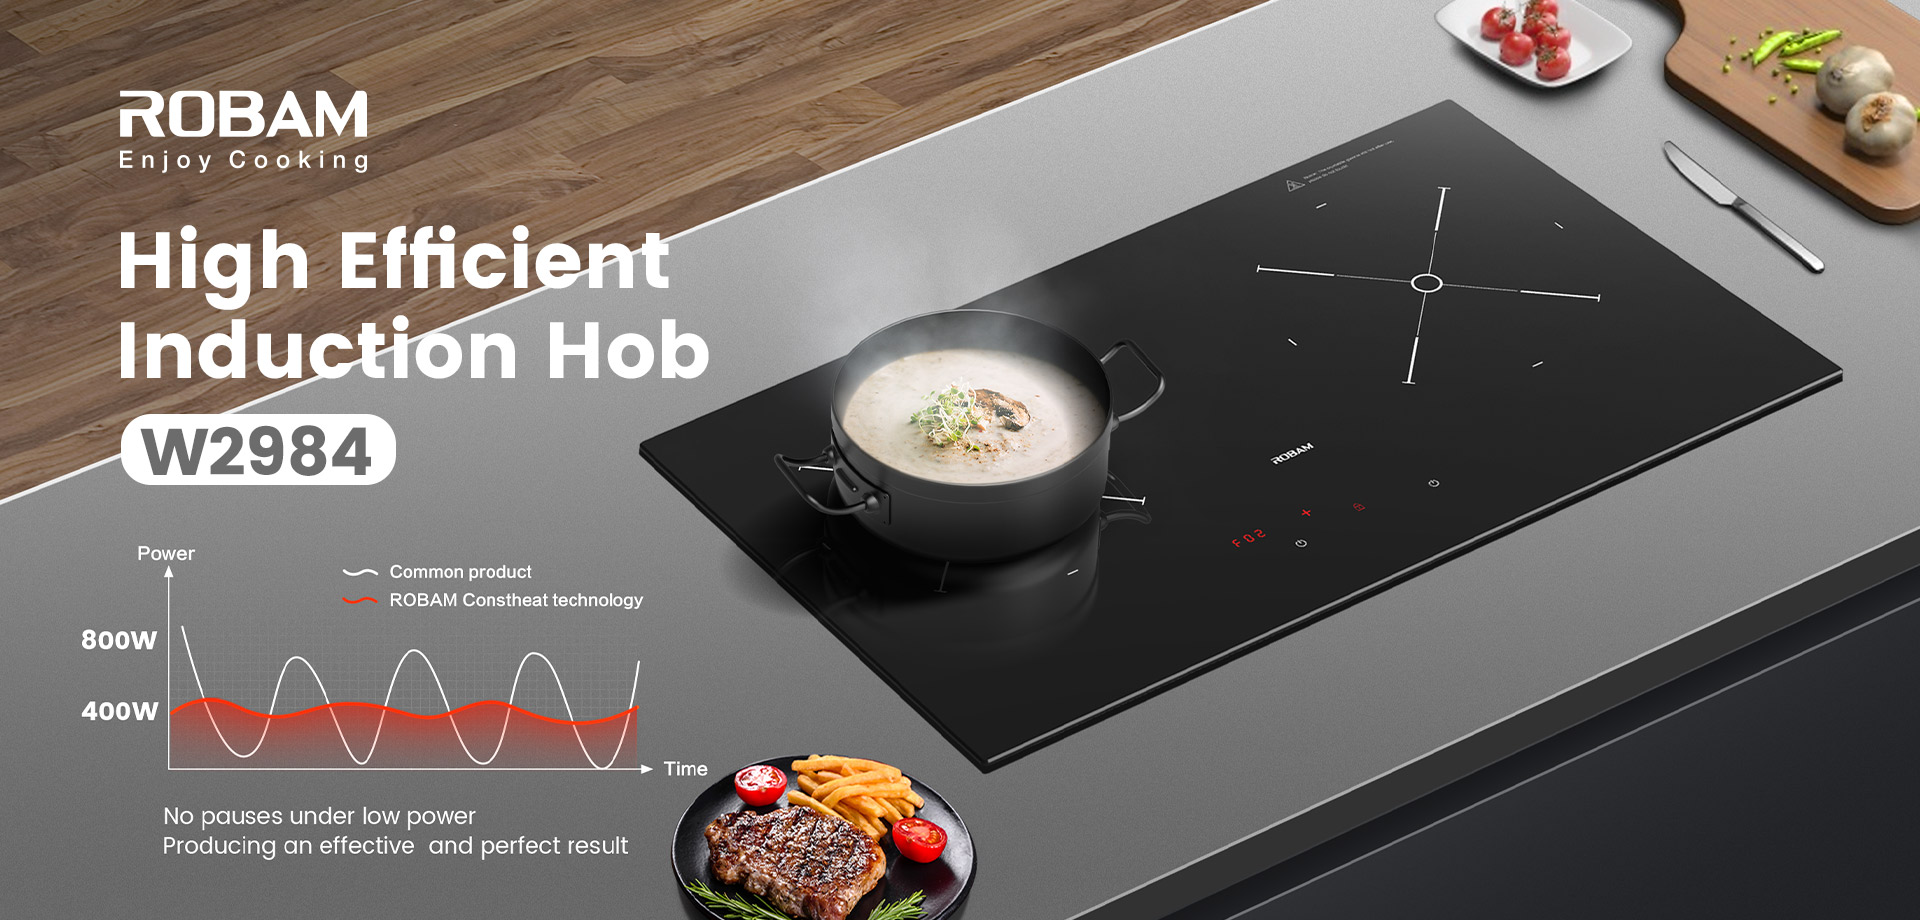 ROBAM Induction Hob W2984